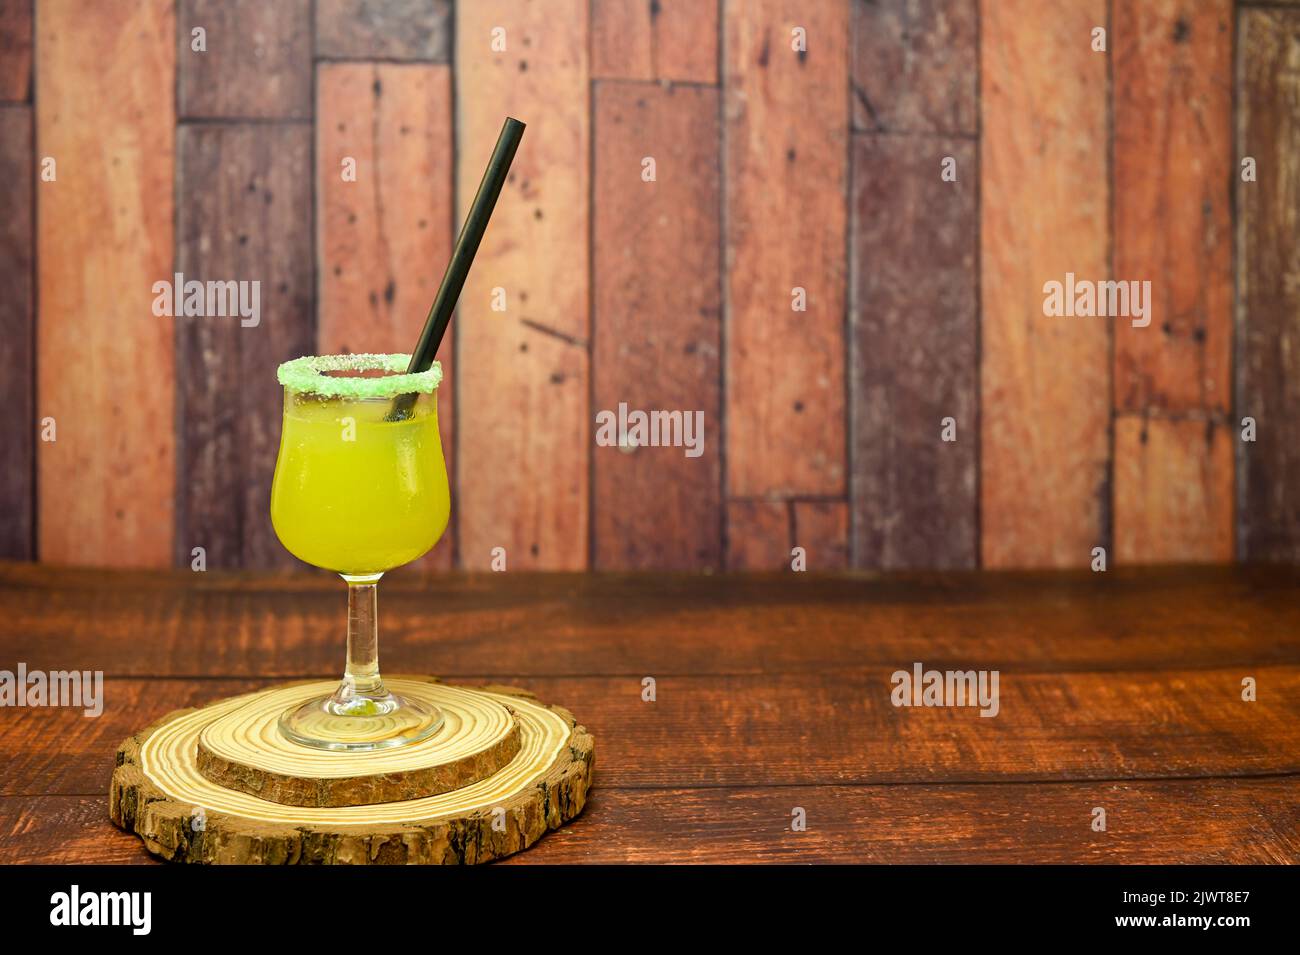 Lemon sorbet with mint, served in a glass. Stock Photo